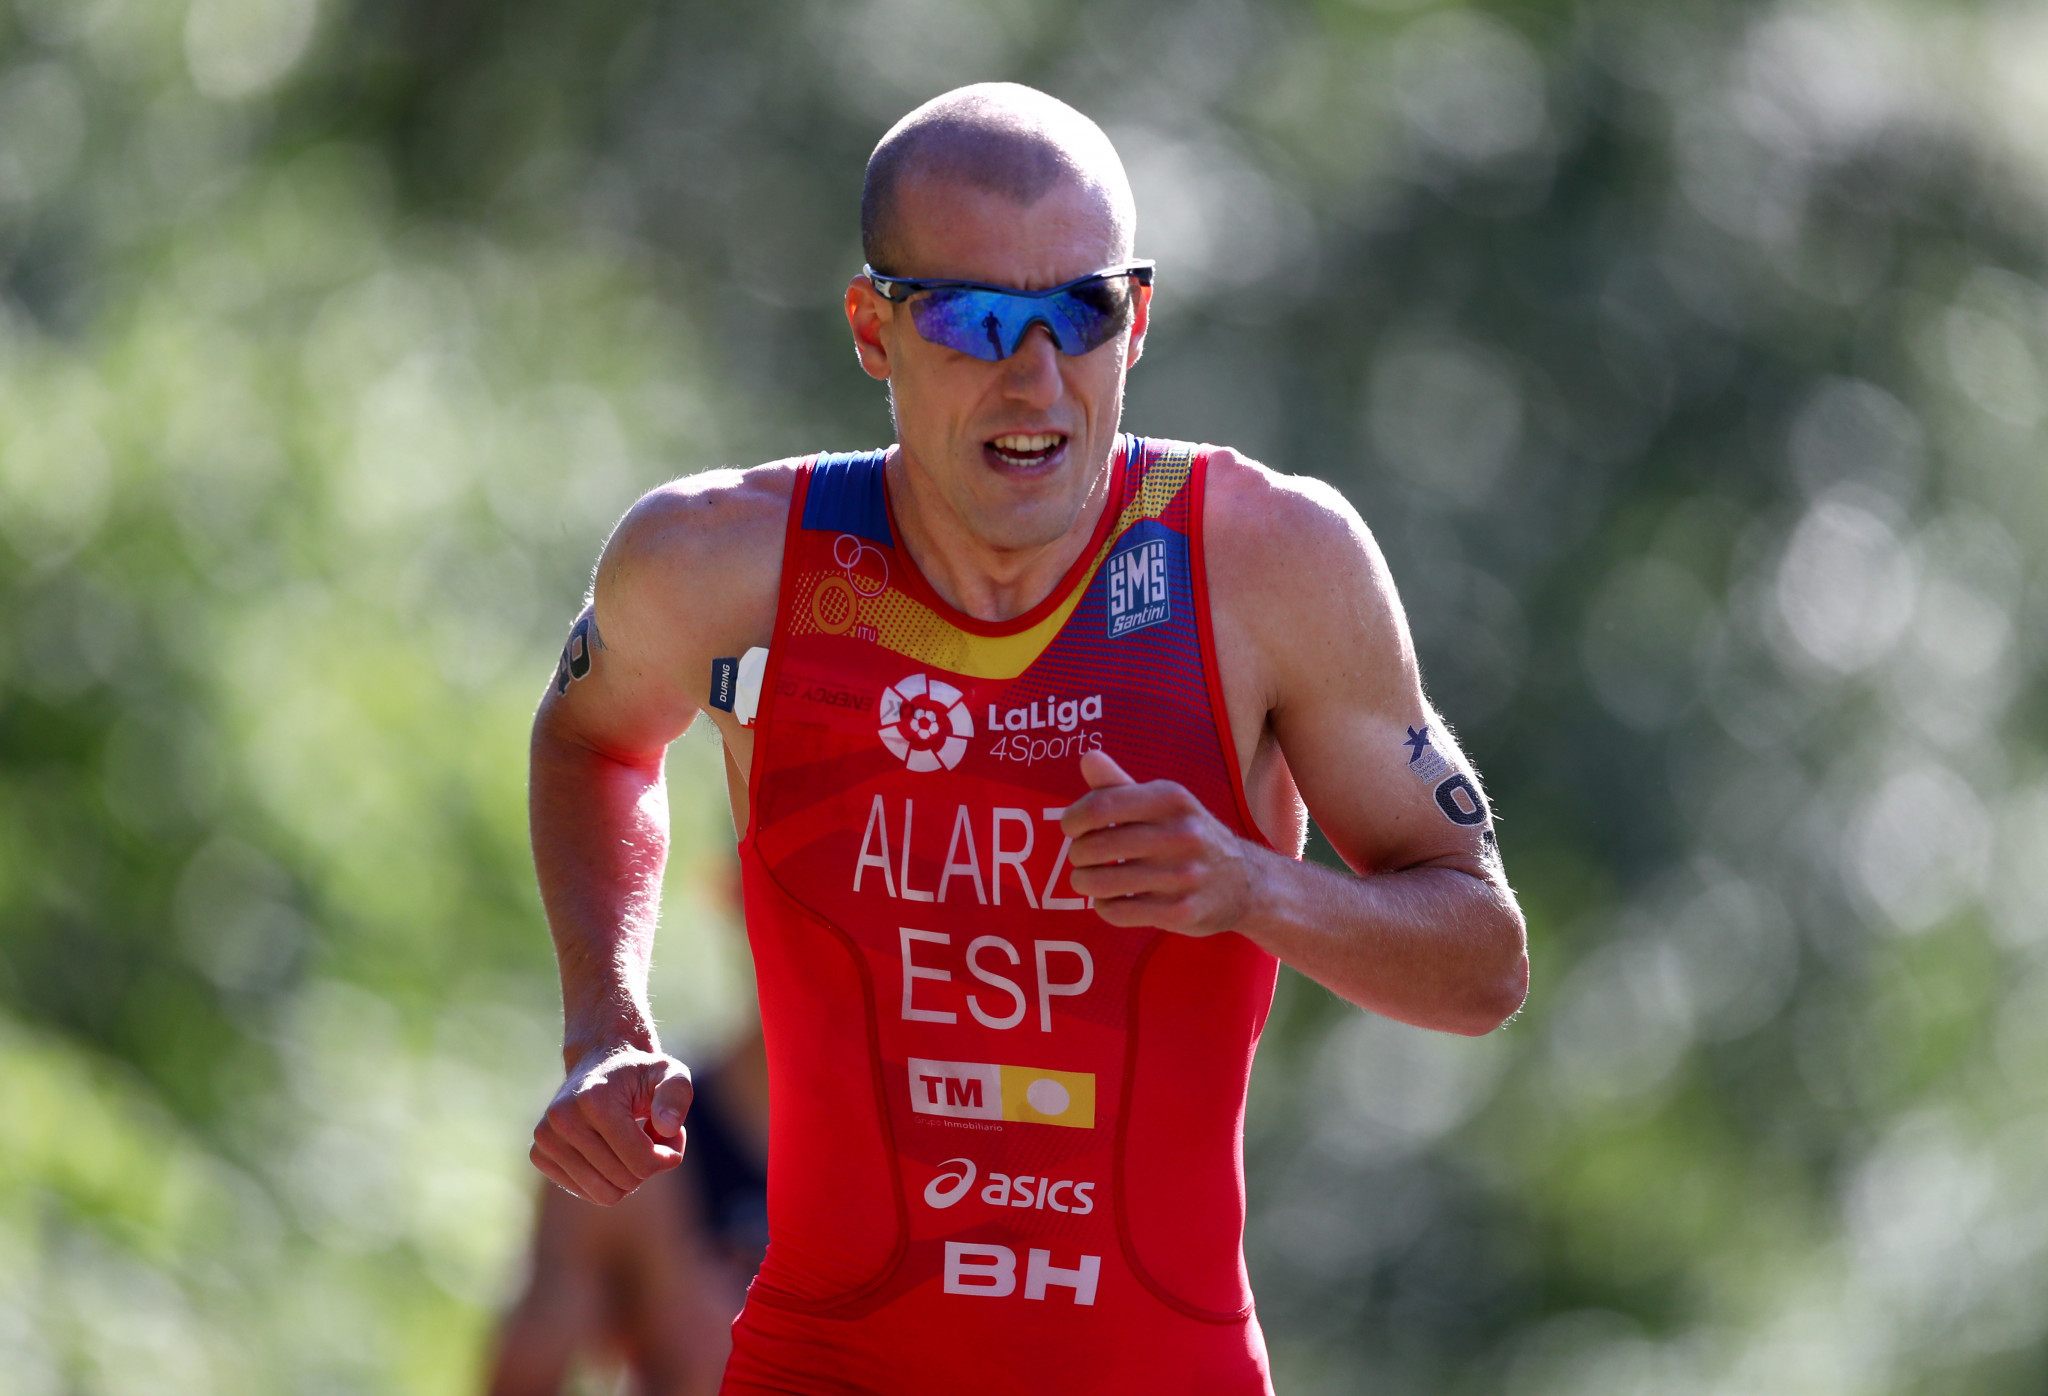 Spain's Fernando Alarza produced a blistering run to move into the silver medal position ©Getty Images